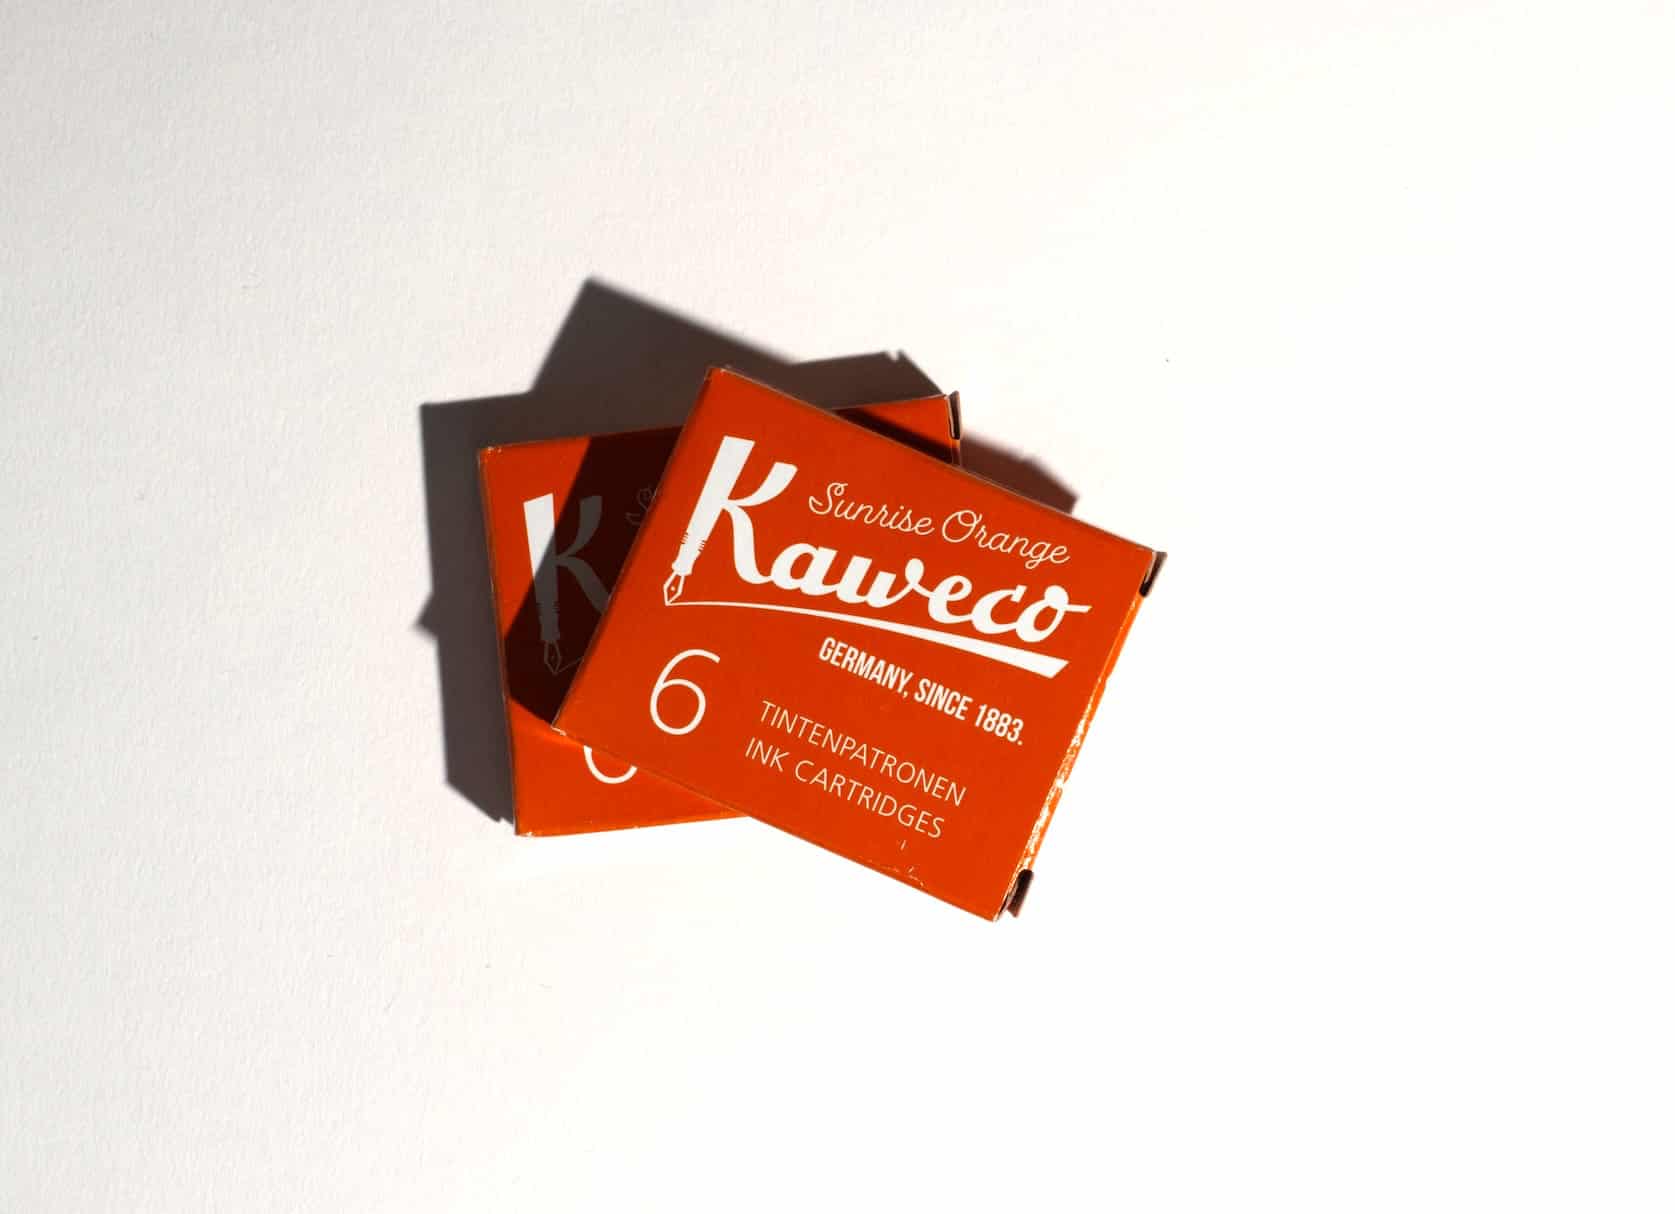 Two boxes of ink cartridges lie on a white surface. Text on packaging reads: Kaweco. Sunrise Orange. Germany, since 1883. 6 Tintenpatronen. Ink Cartridges.